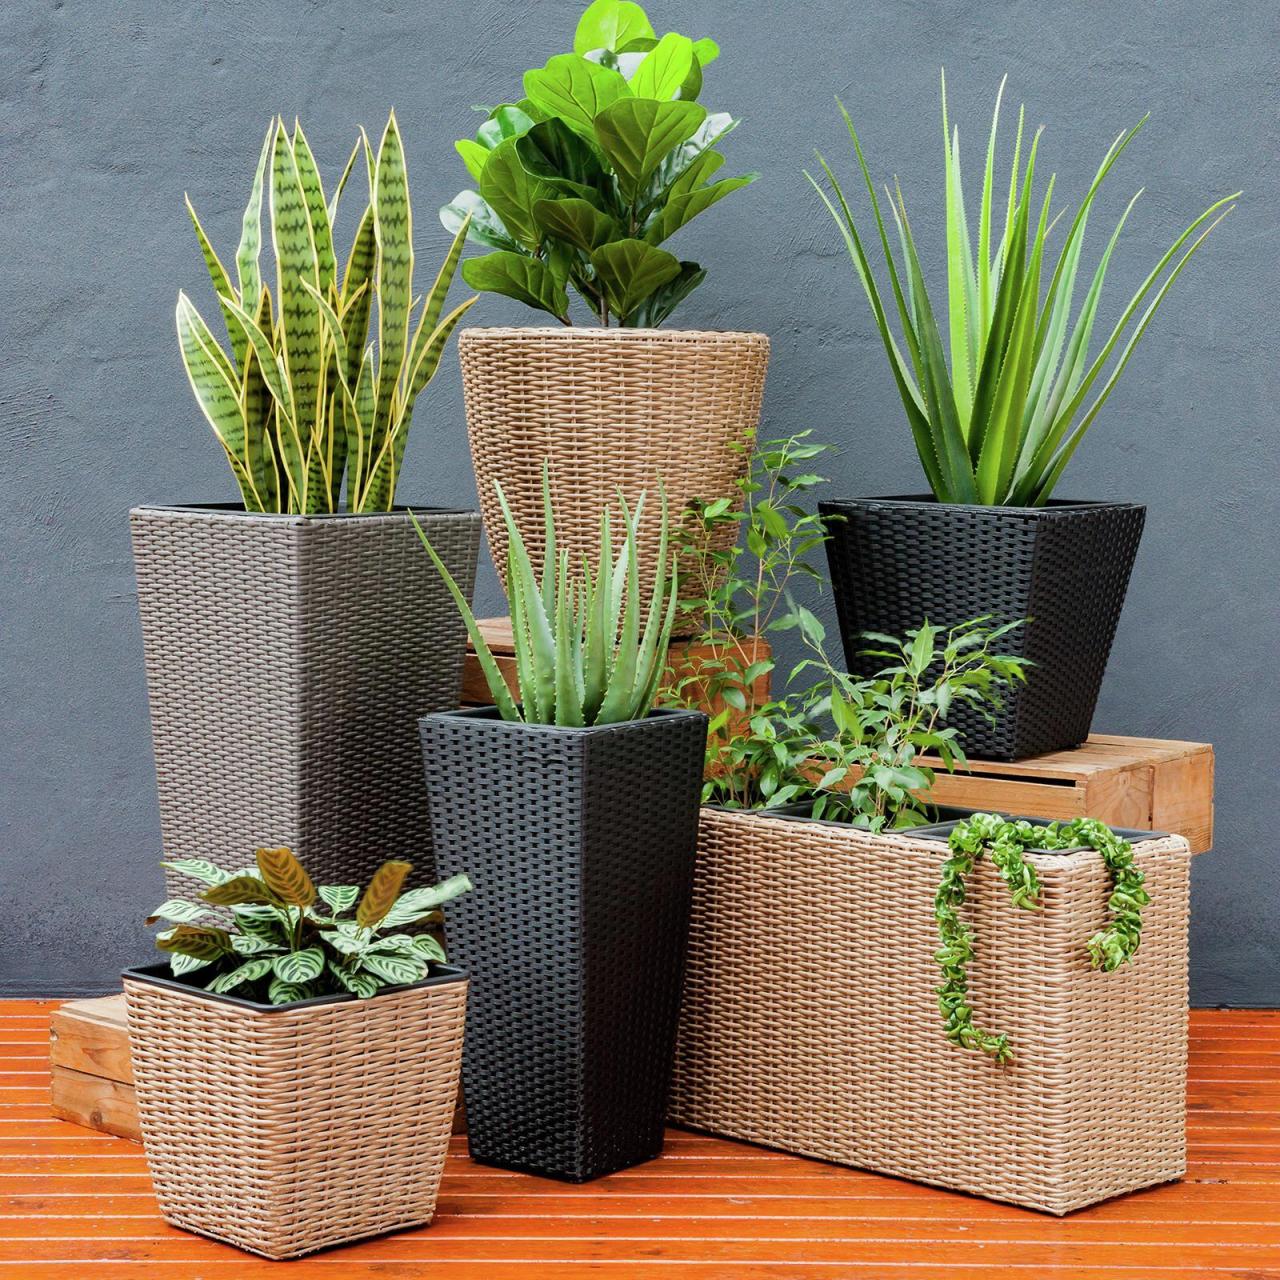 Hanging Plants Indoor | Bunnings Large Outdoor Plant Pots: A Guide to Selecting and Using